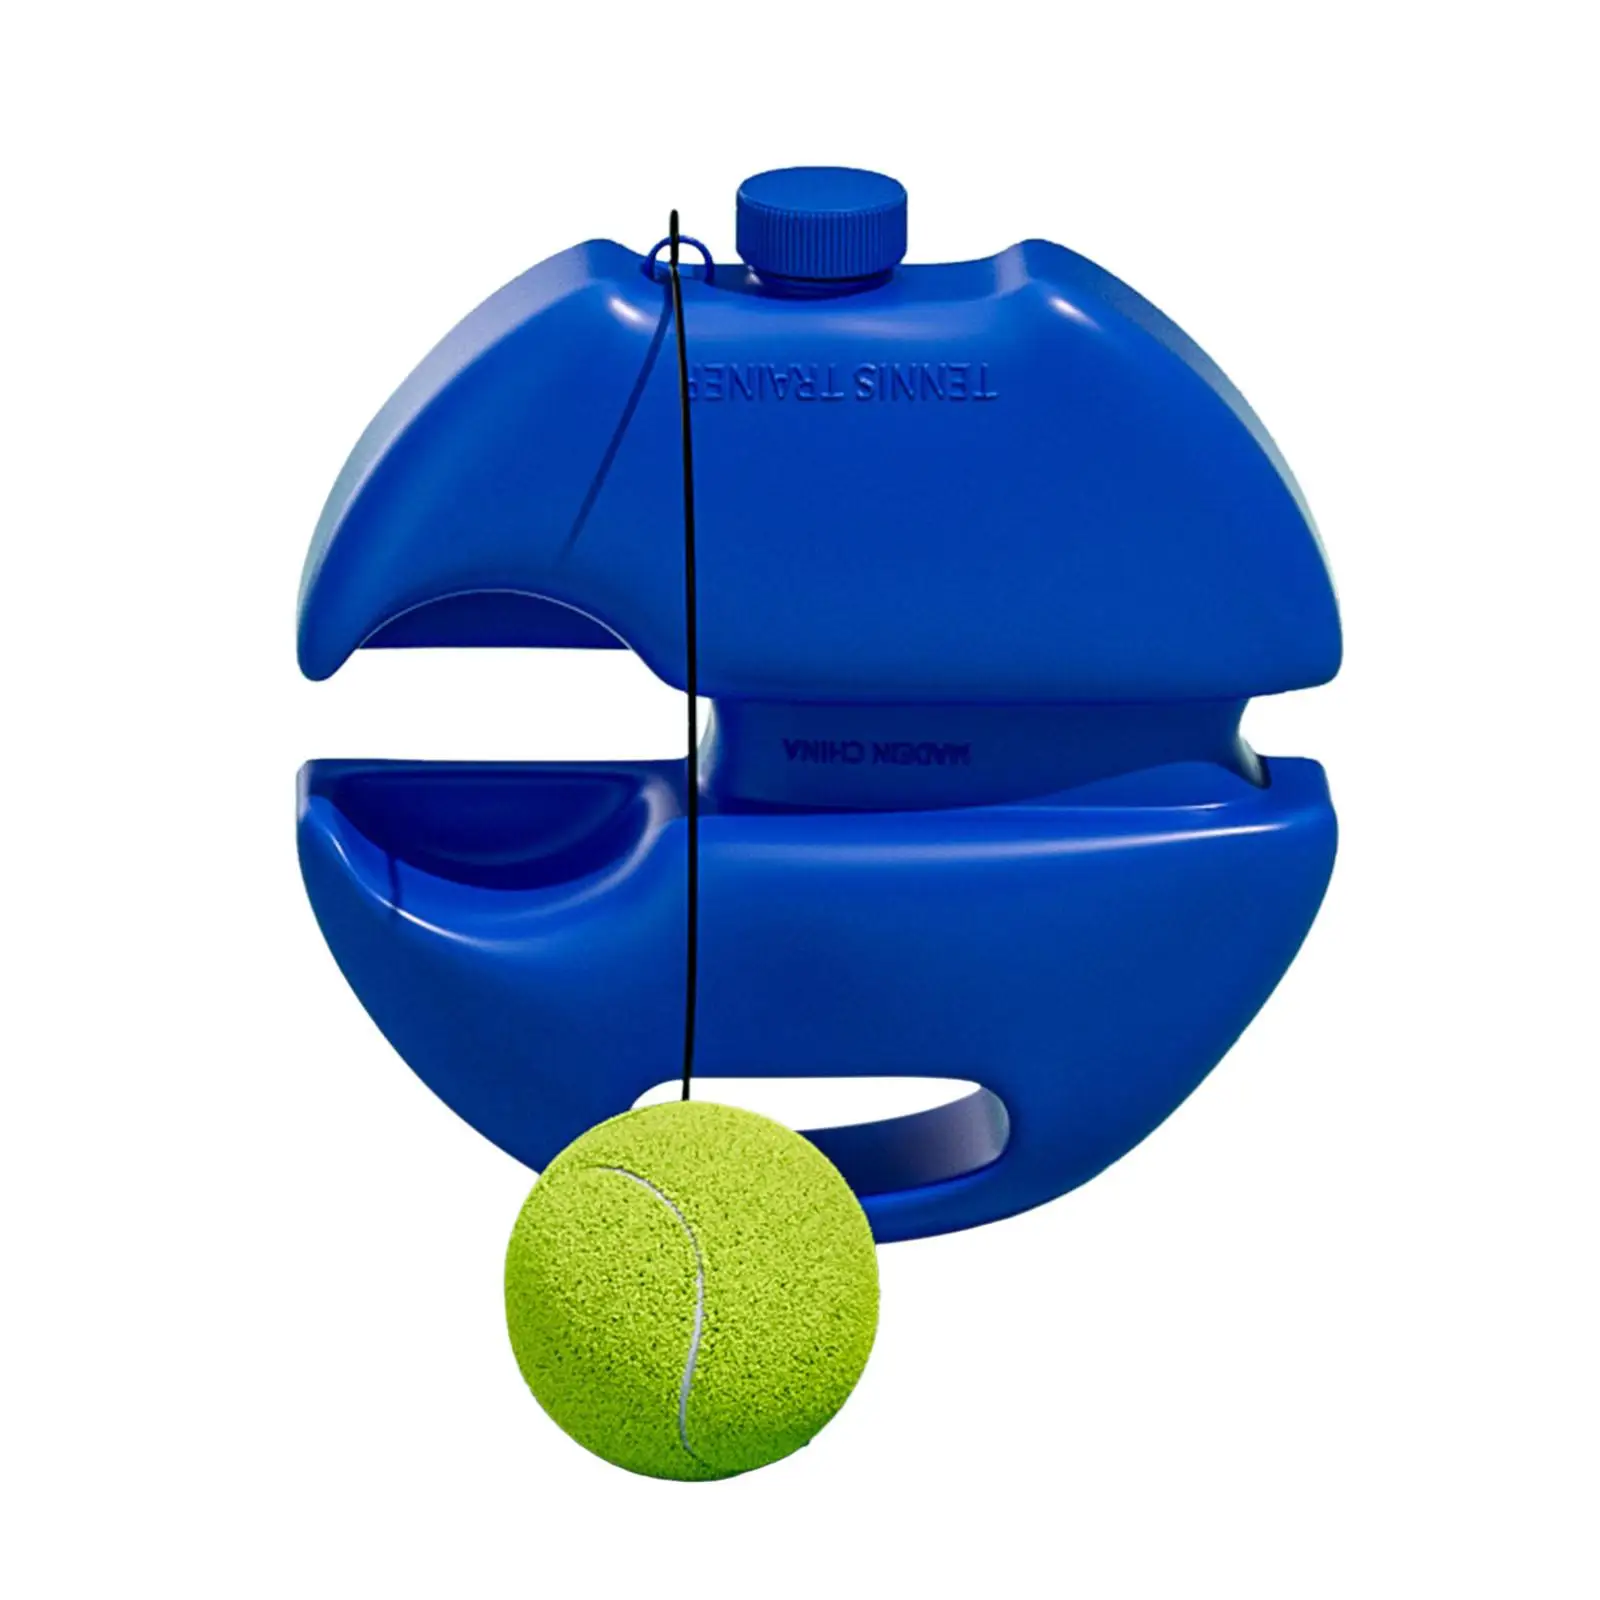 Tennis Trainer Rebound Ball with String Beginners Professional Portable with Tennis Ball Tennis Practice Device Tennis Training